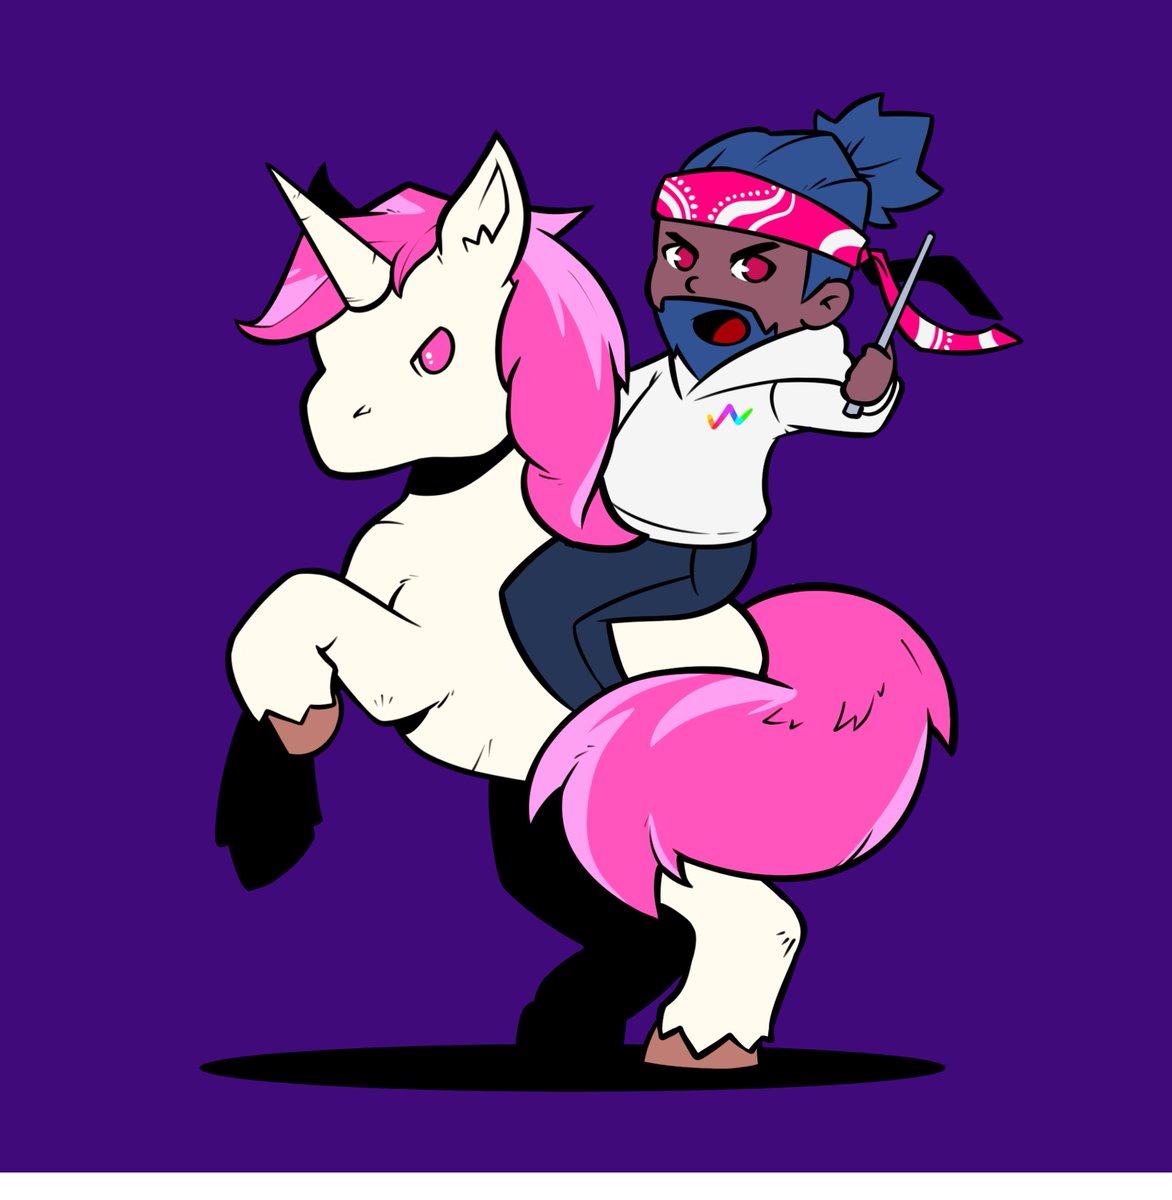 Shoutout to @HeyPixlit for this absolutely epic 'I Stand With Uniswap' creation 🦄🦄🦄